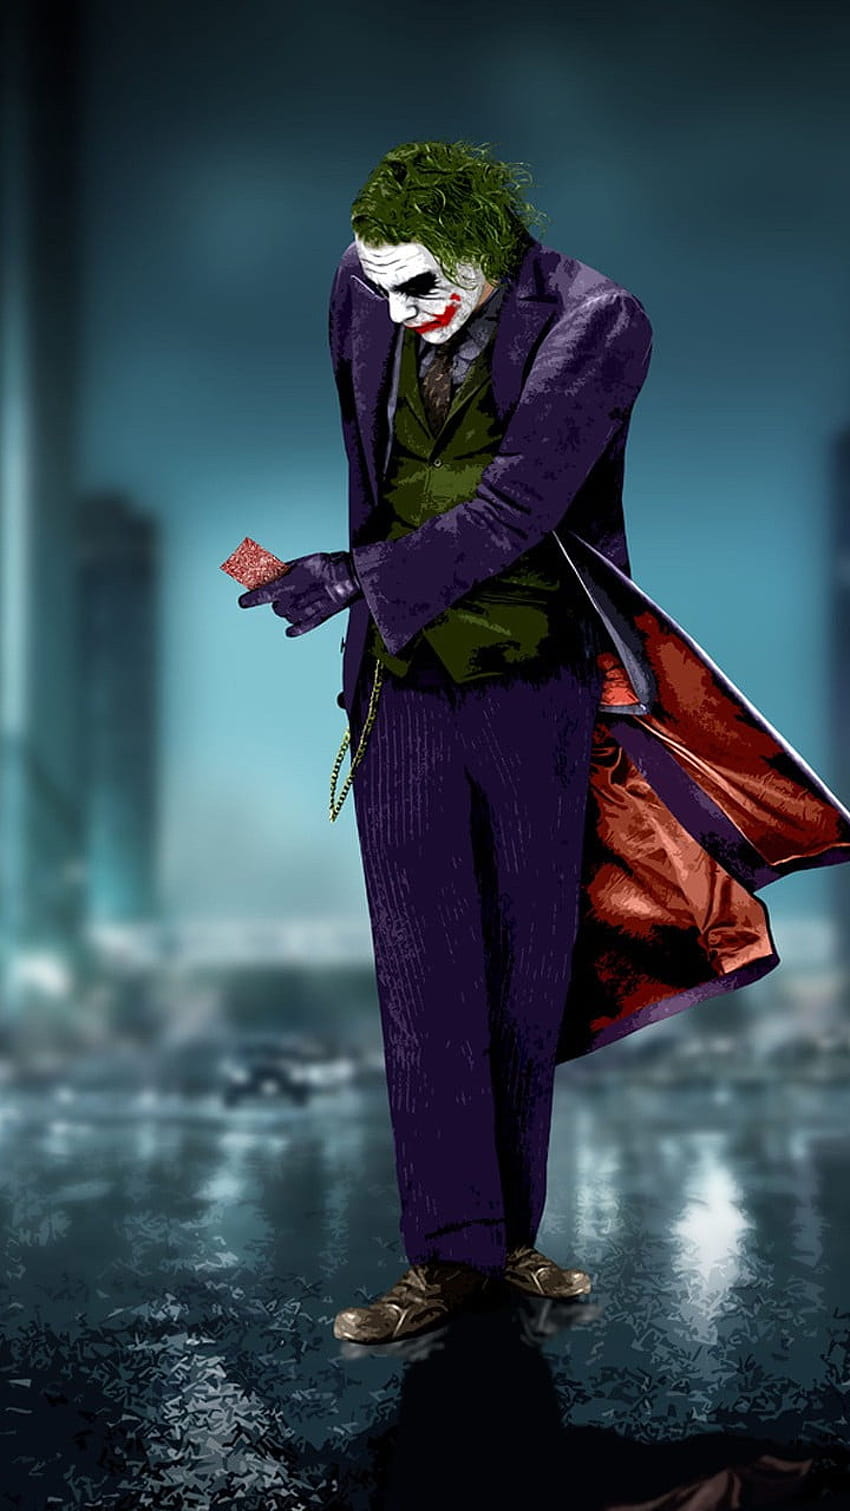 The Joker The Dark Knight movies full length one person • For You For & Mobile HD phone wallpaper